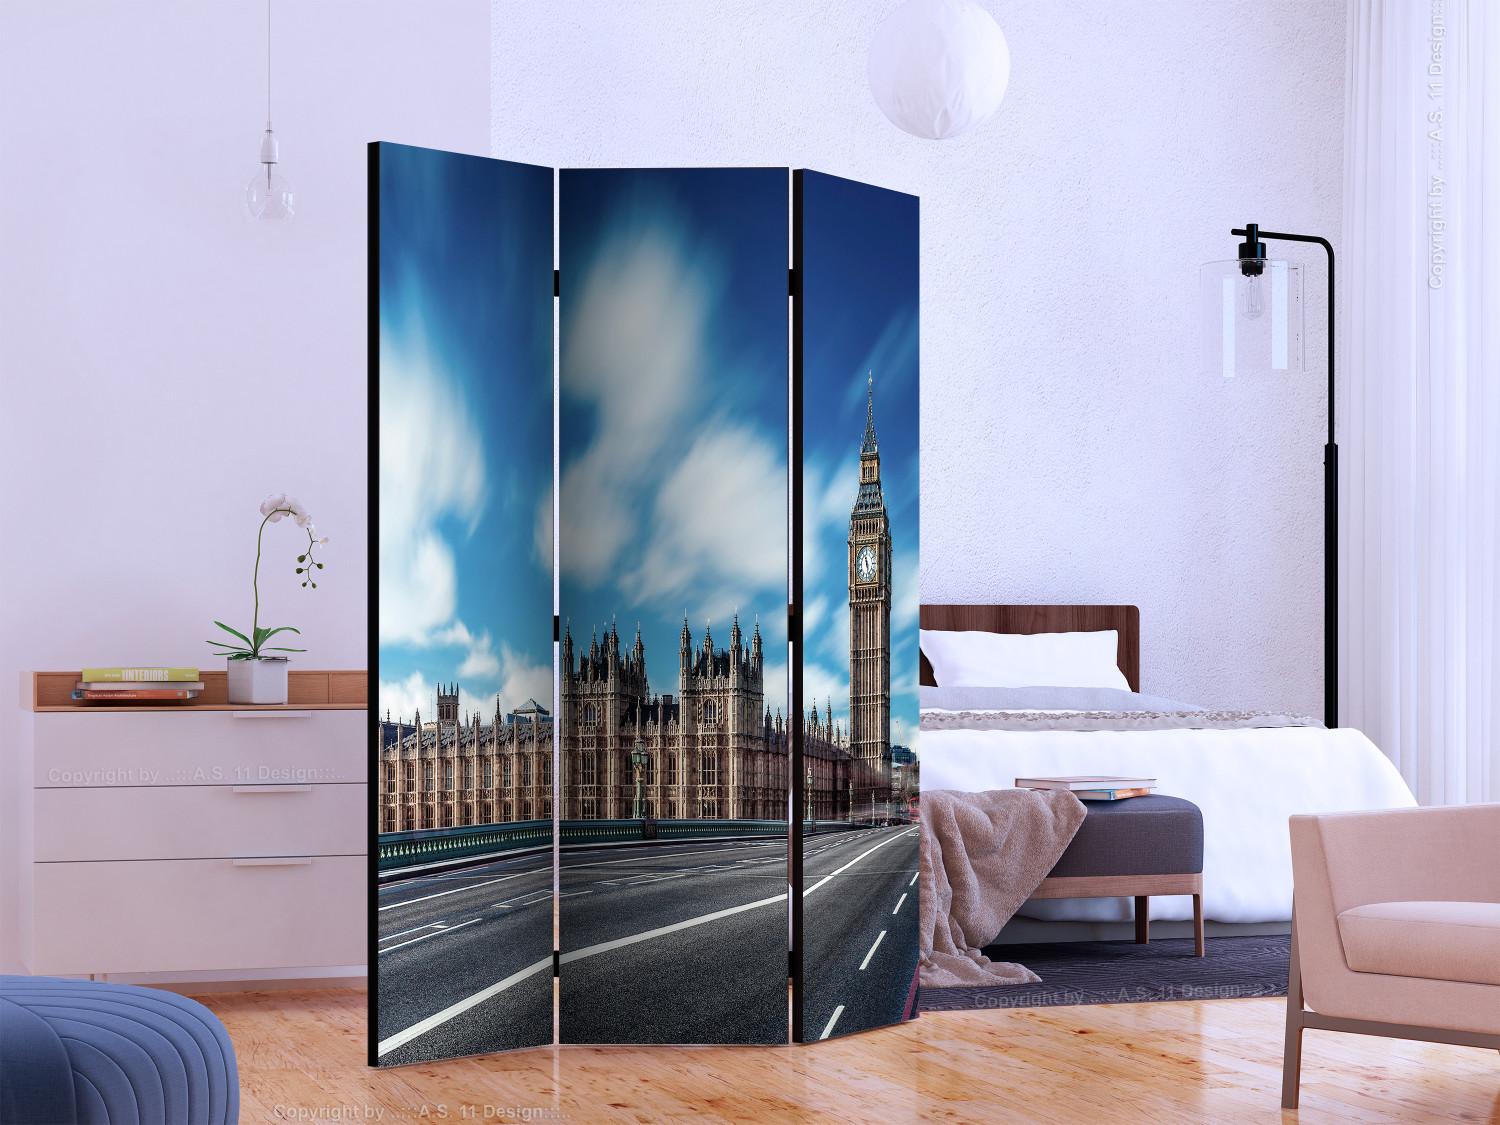 Room Divider Sunny London (3-piece) - Big Ben against the backdrop of architecture and sky